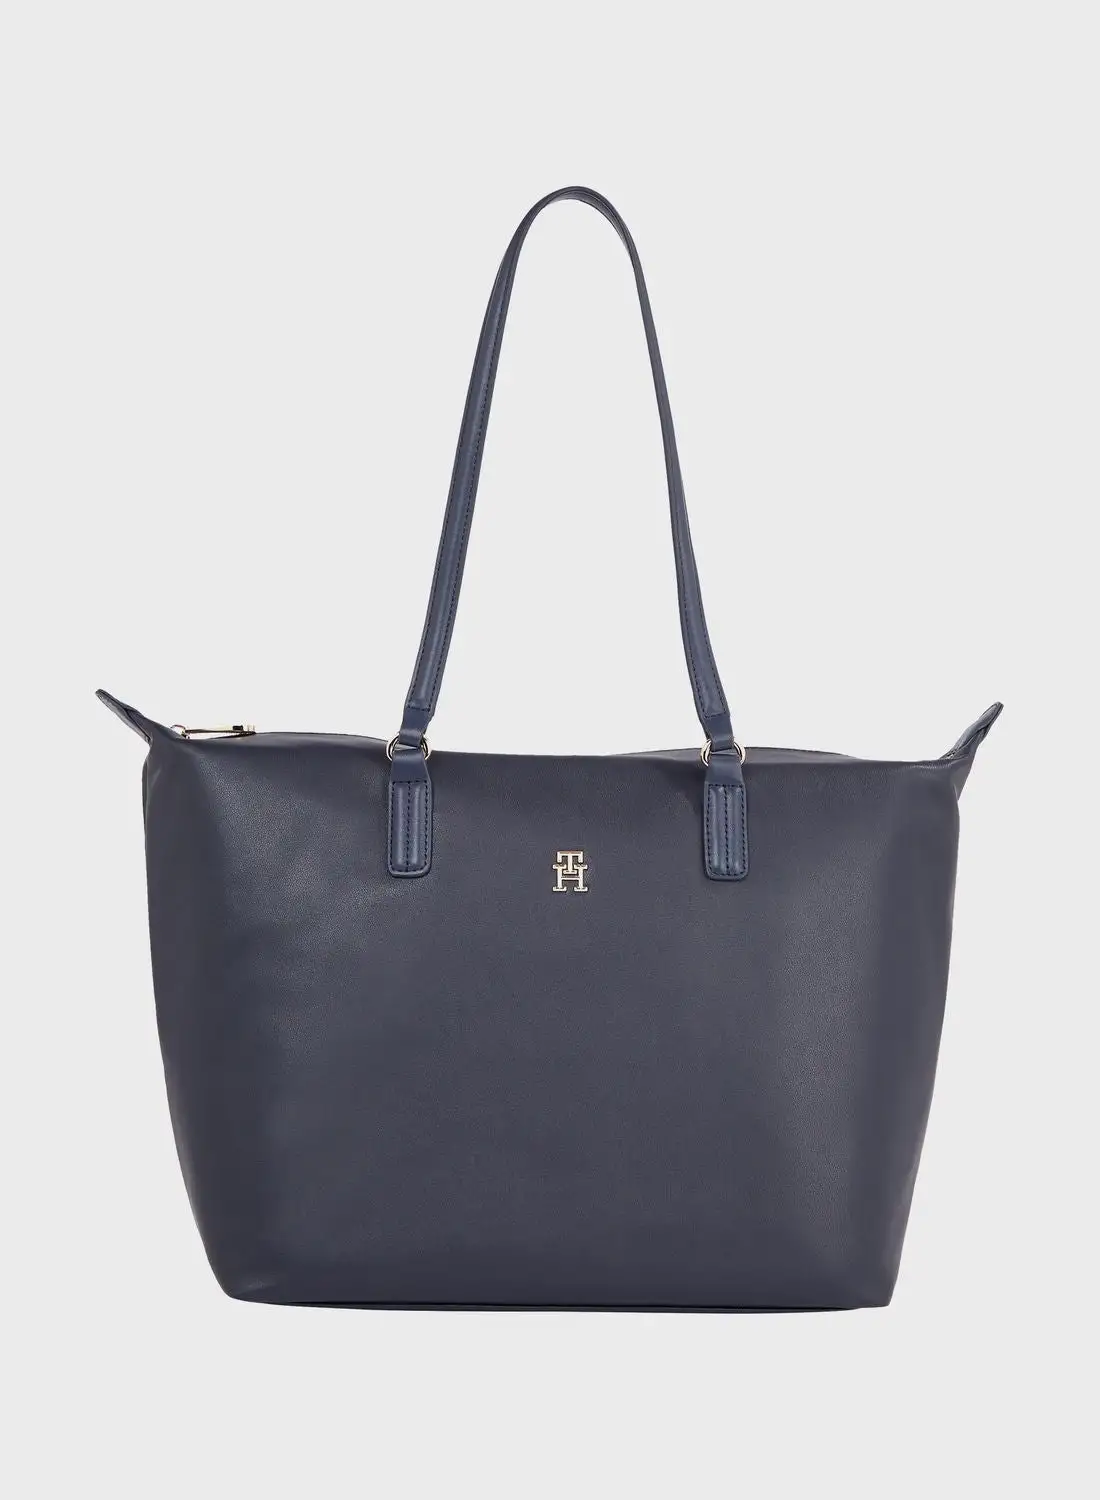 TOMMY HILFIGER Poppy Top Handle Tote Bag